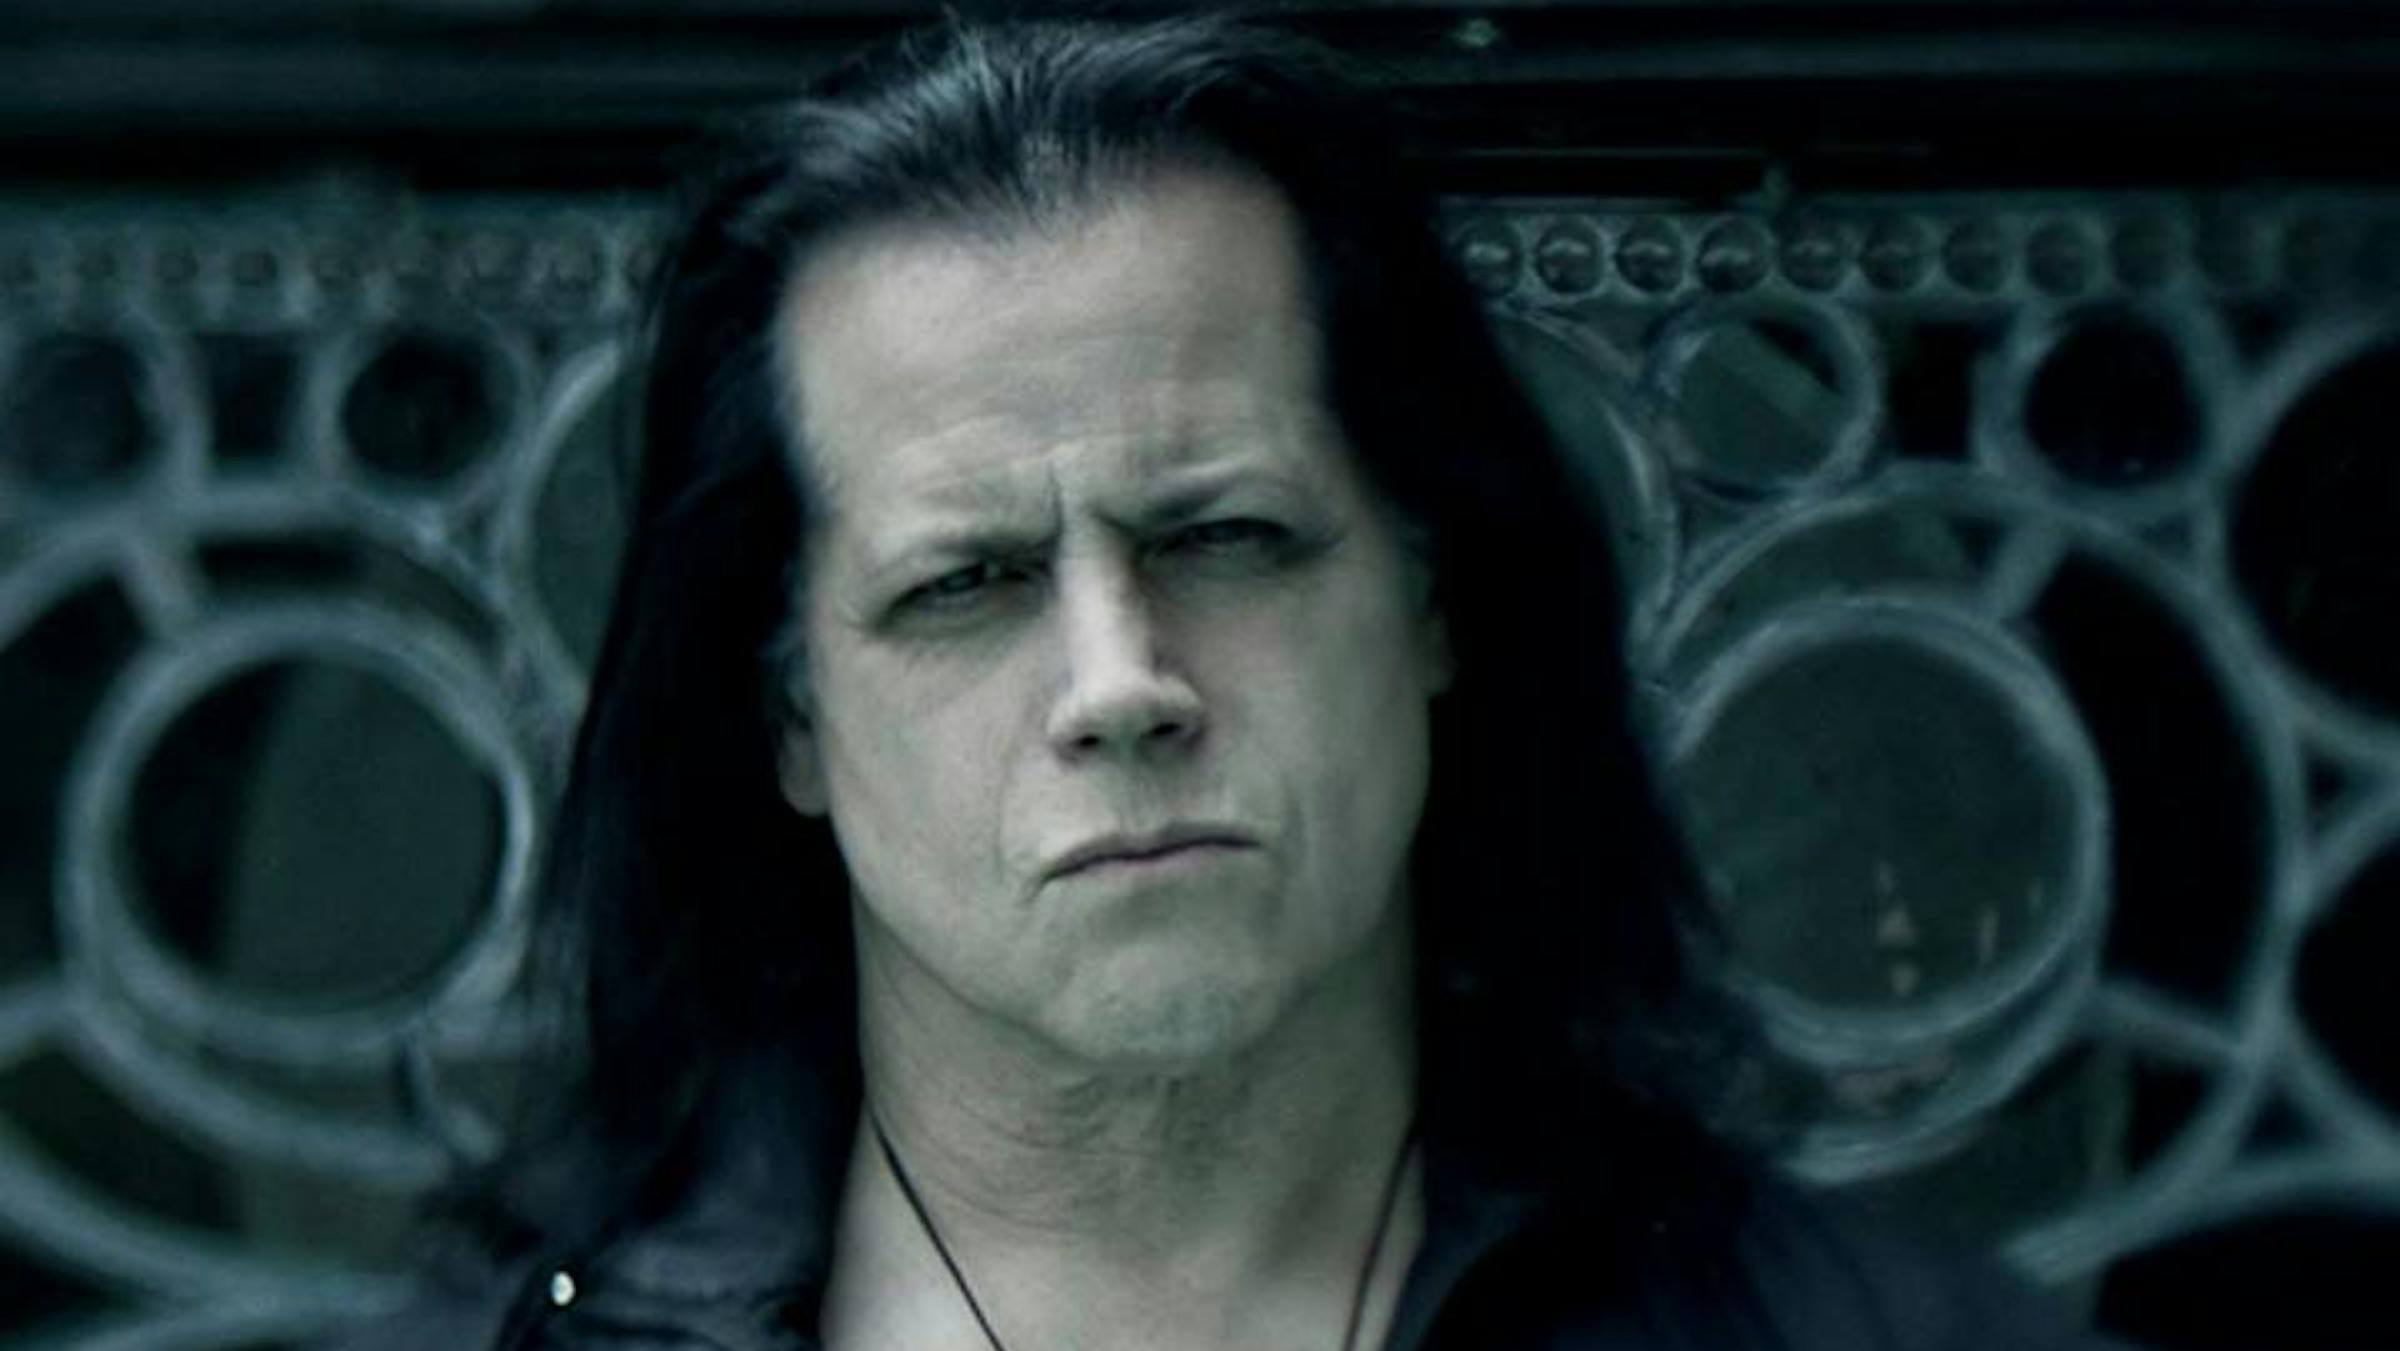 Danzig Shares Stills From Upcoming Movie Based On His Comics